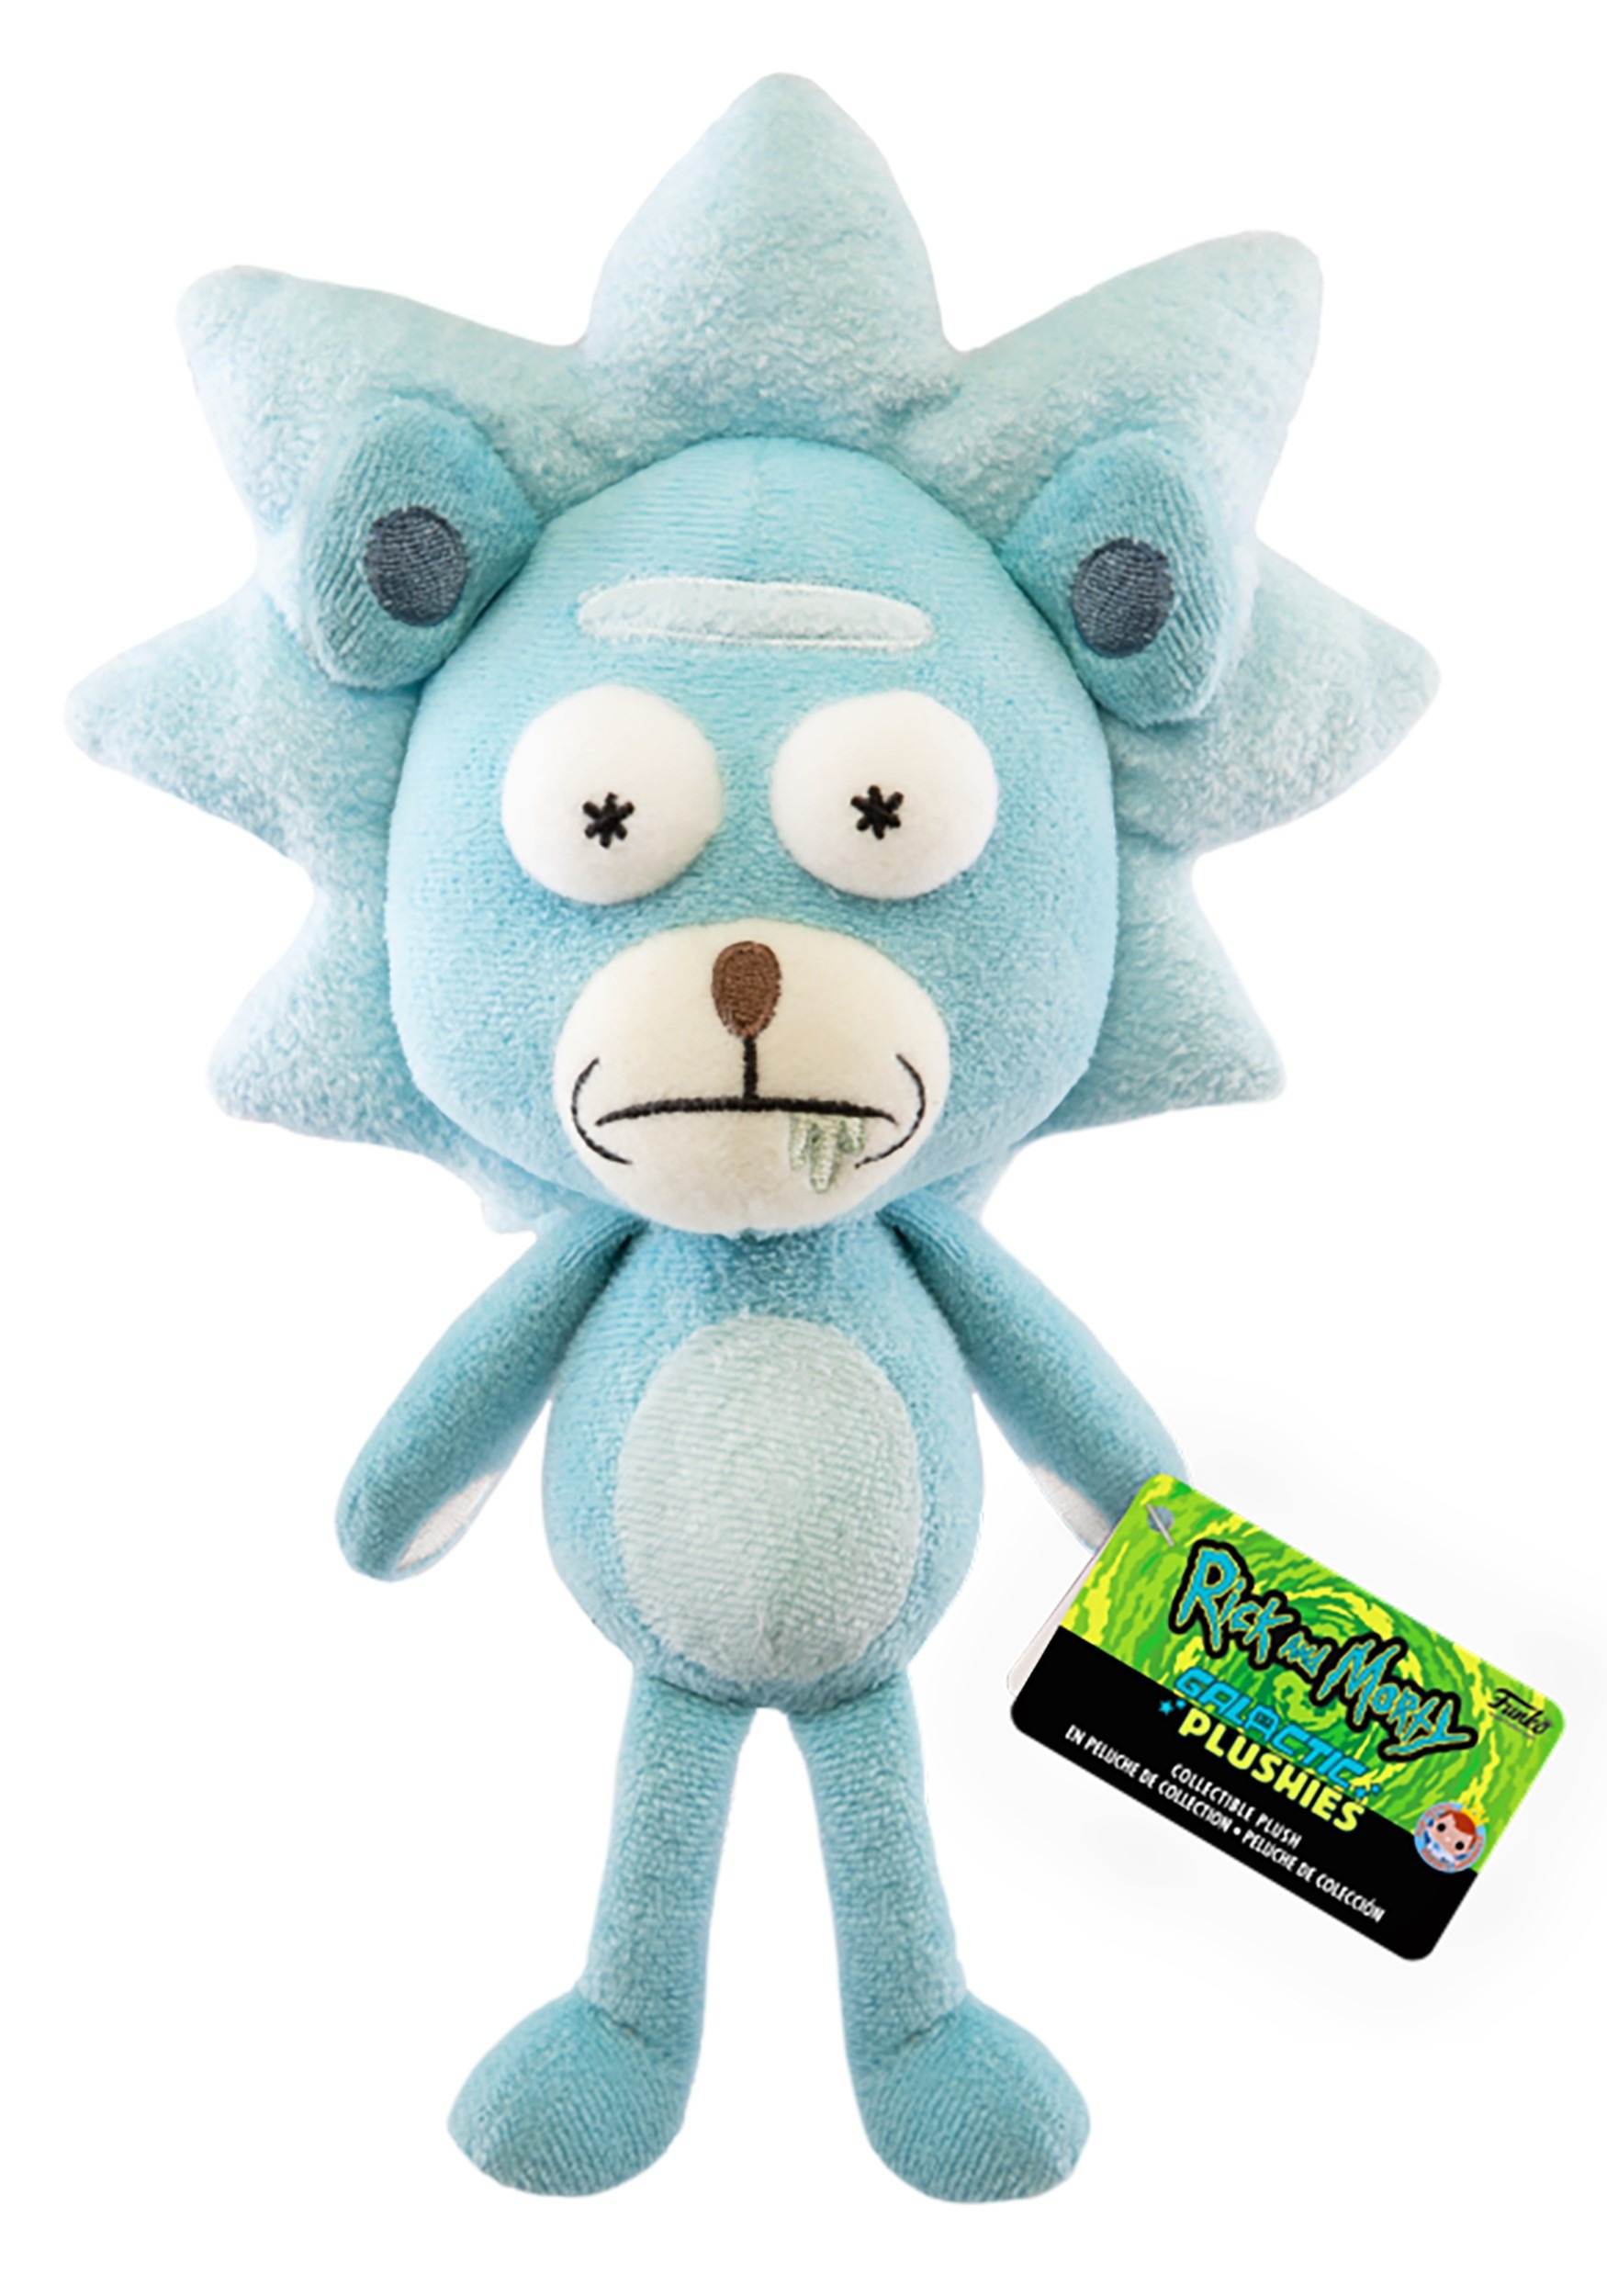 rick and morty collectible plush